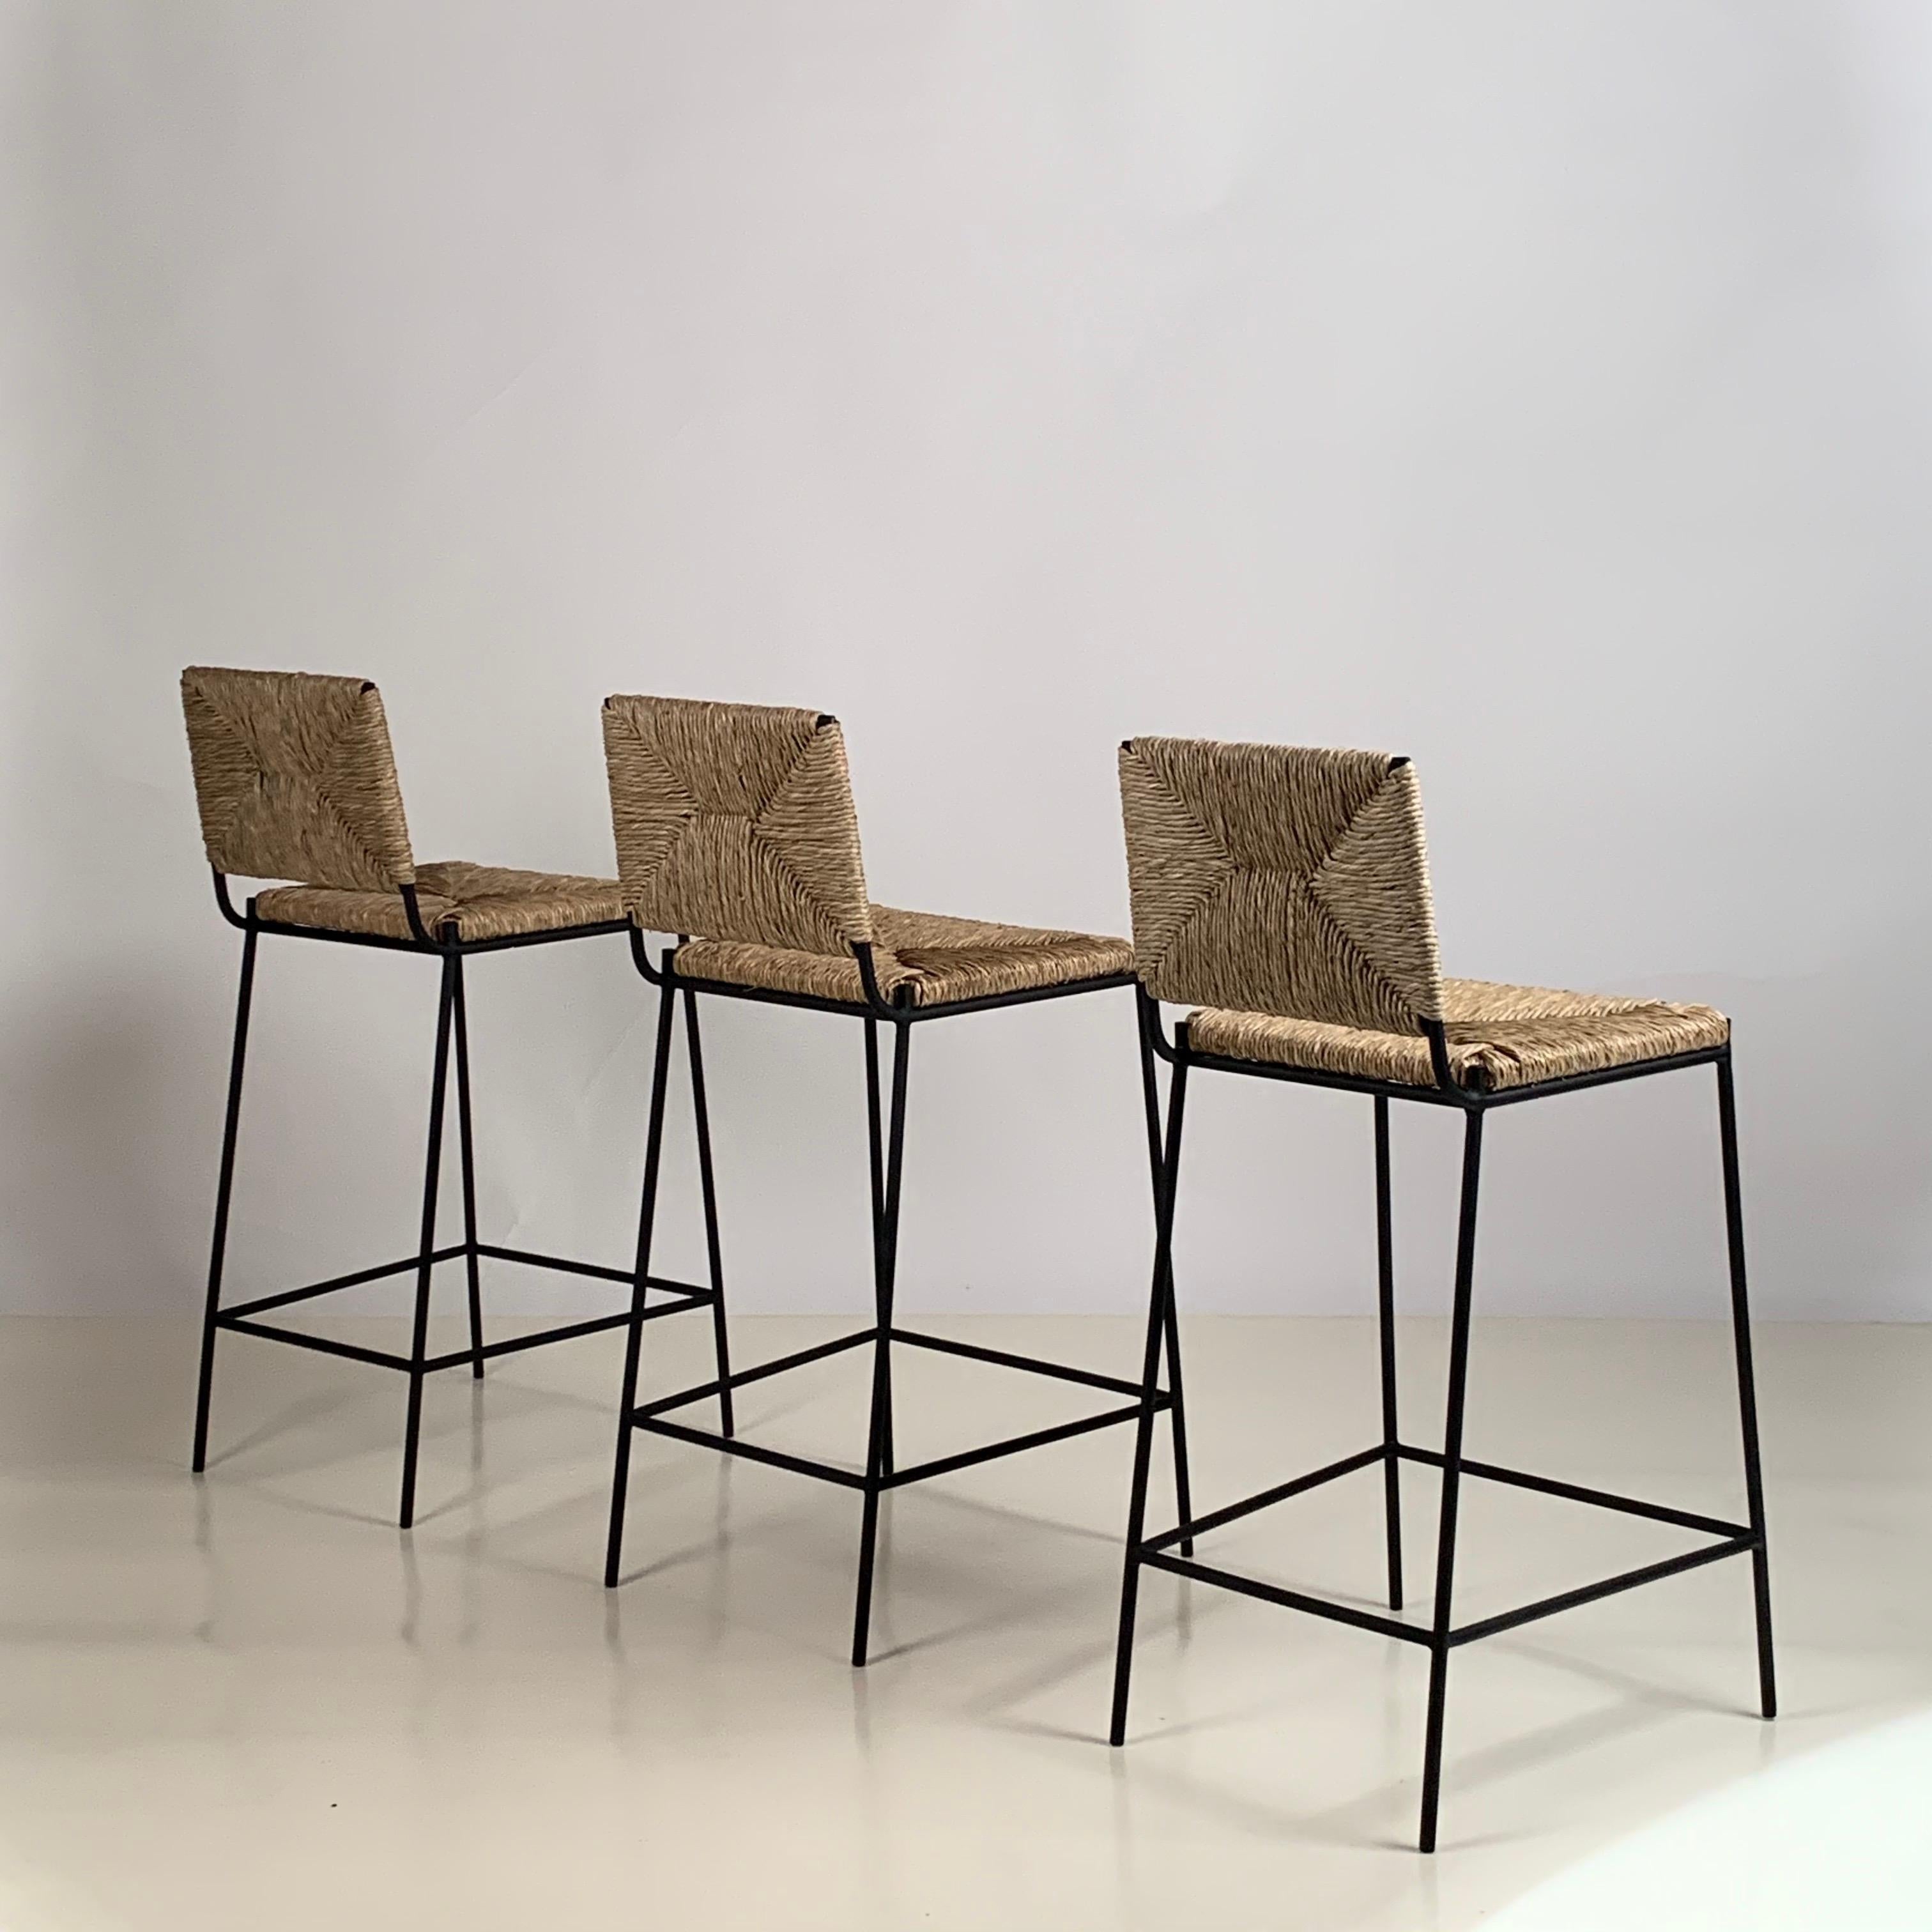 Set of 3 slender 'Campagne' counter stools by Design Frères.

Comfortable, with a minimal footprint.

Extra support under the rush seat.

Feet pads to protect flooring.